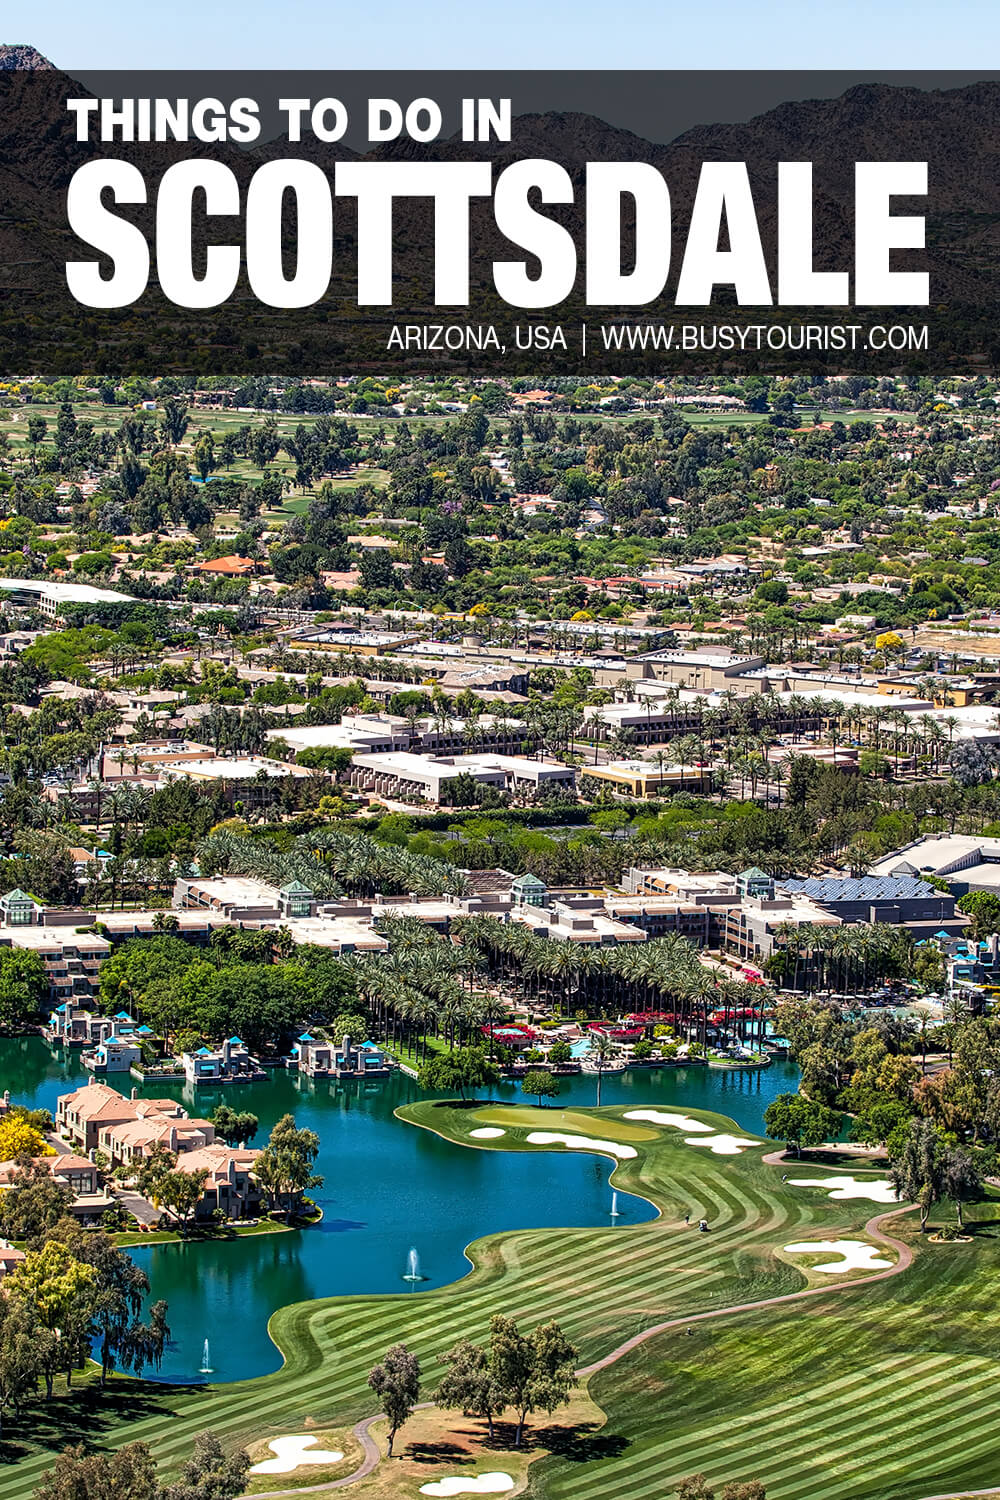 30 Best & Fun Things To Do In Scottsdale (AZ) - Attractions & Activities